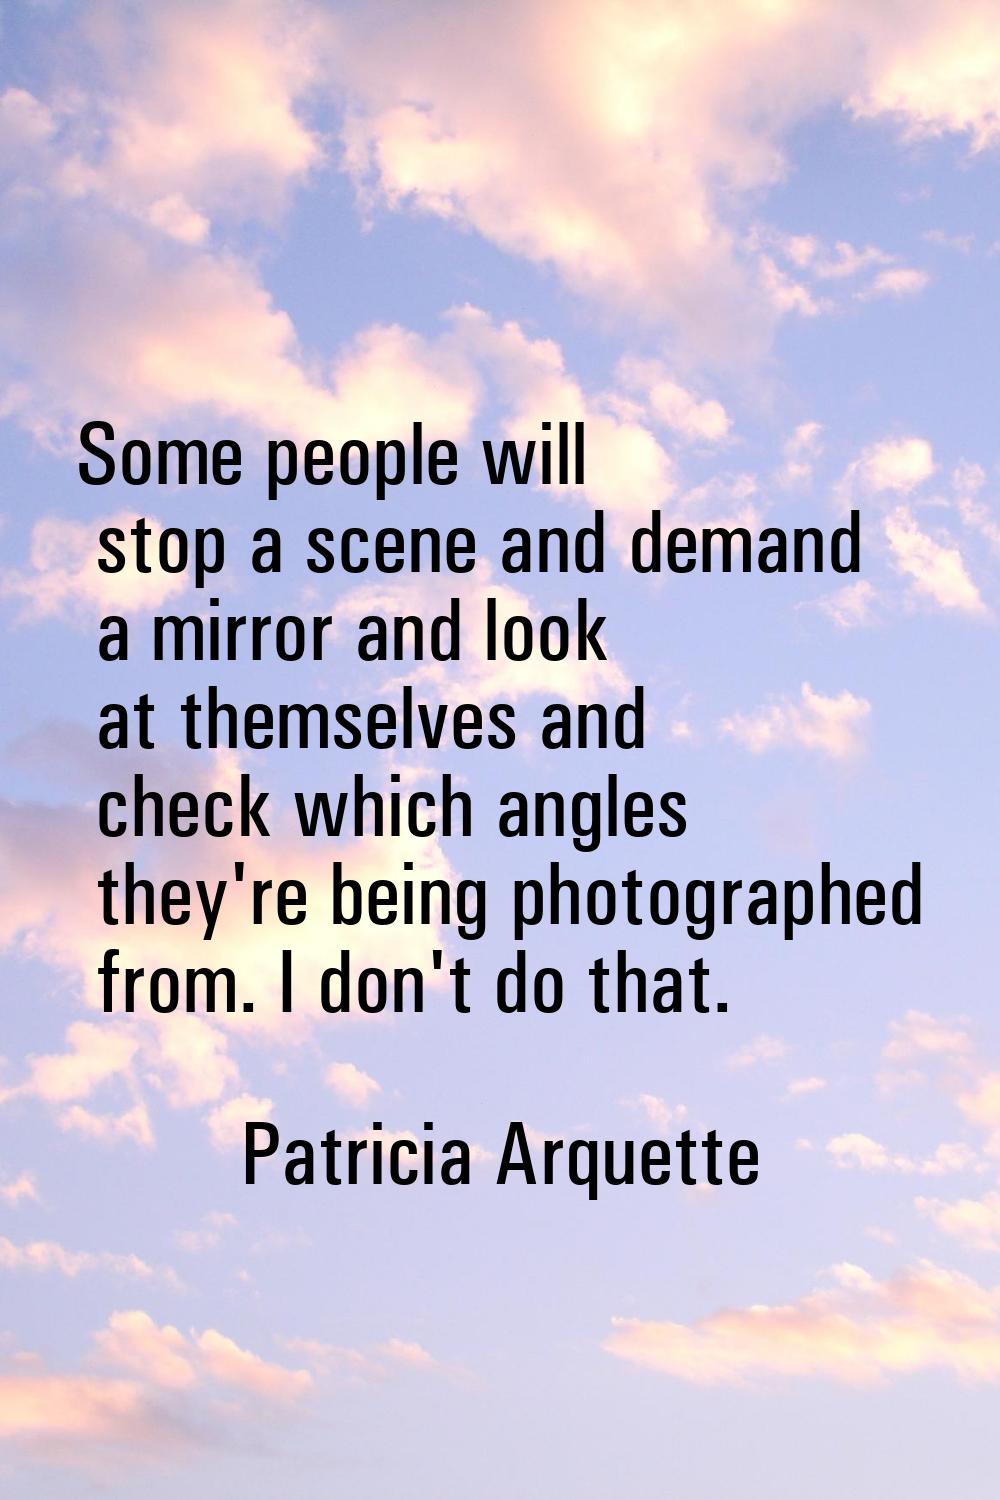 Some people will stop a scene and demand a mirror and look at themselves and check which angles the